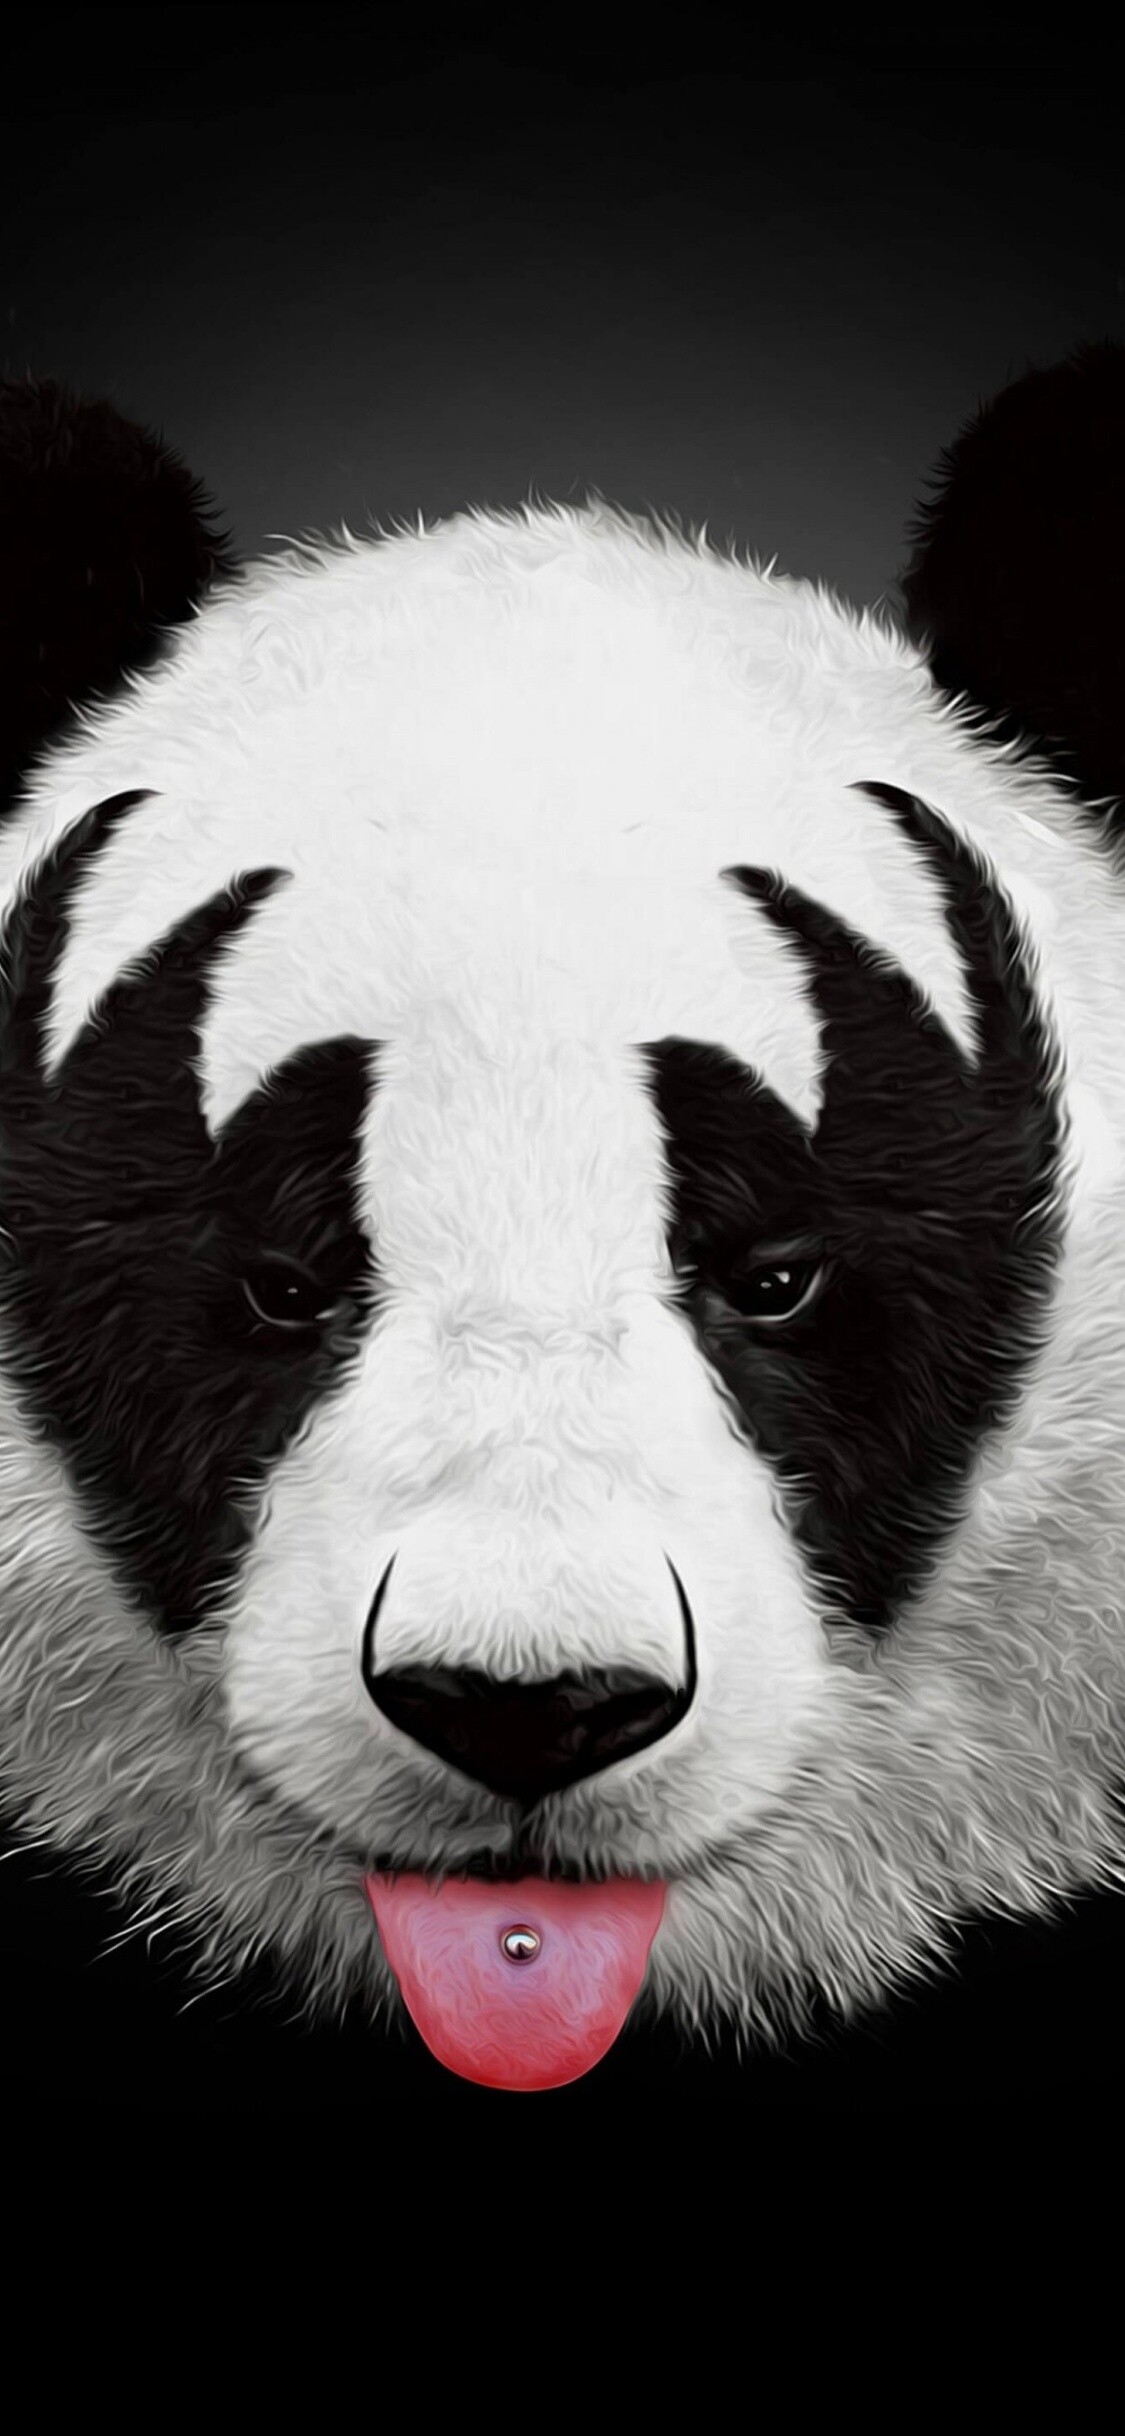 Panda: Black and white bears, Found in thick bamboo forests. 1130x2440 HD Wallpaper.